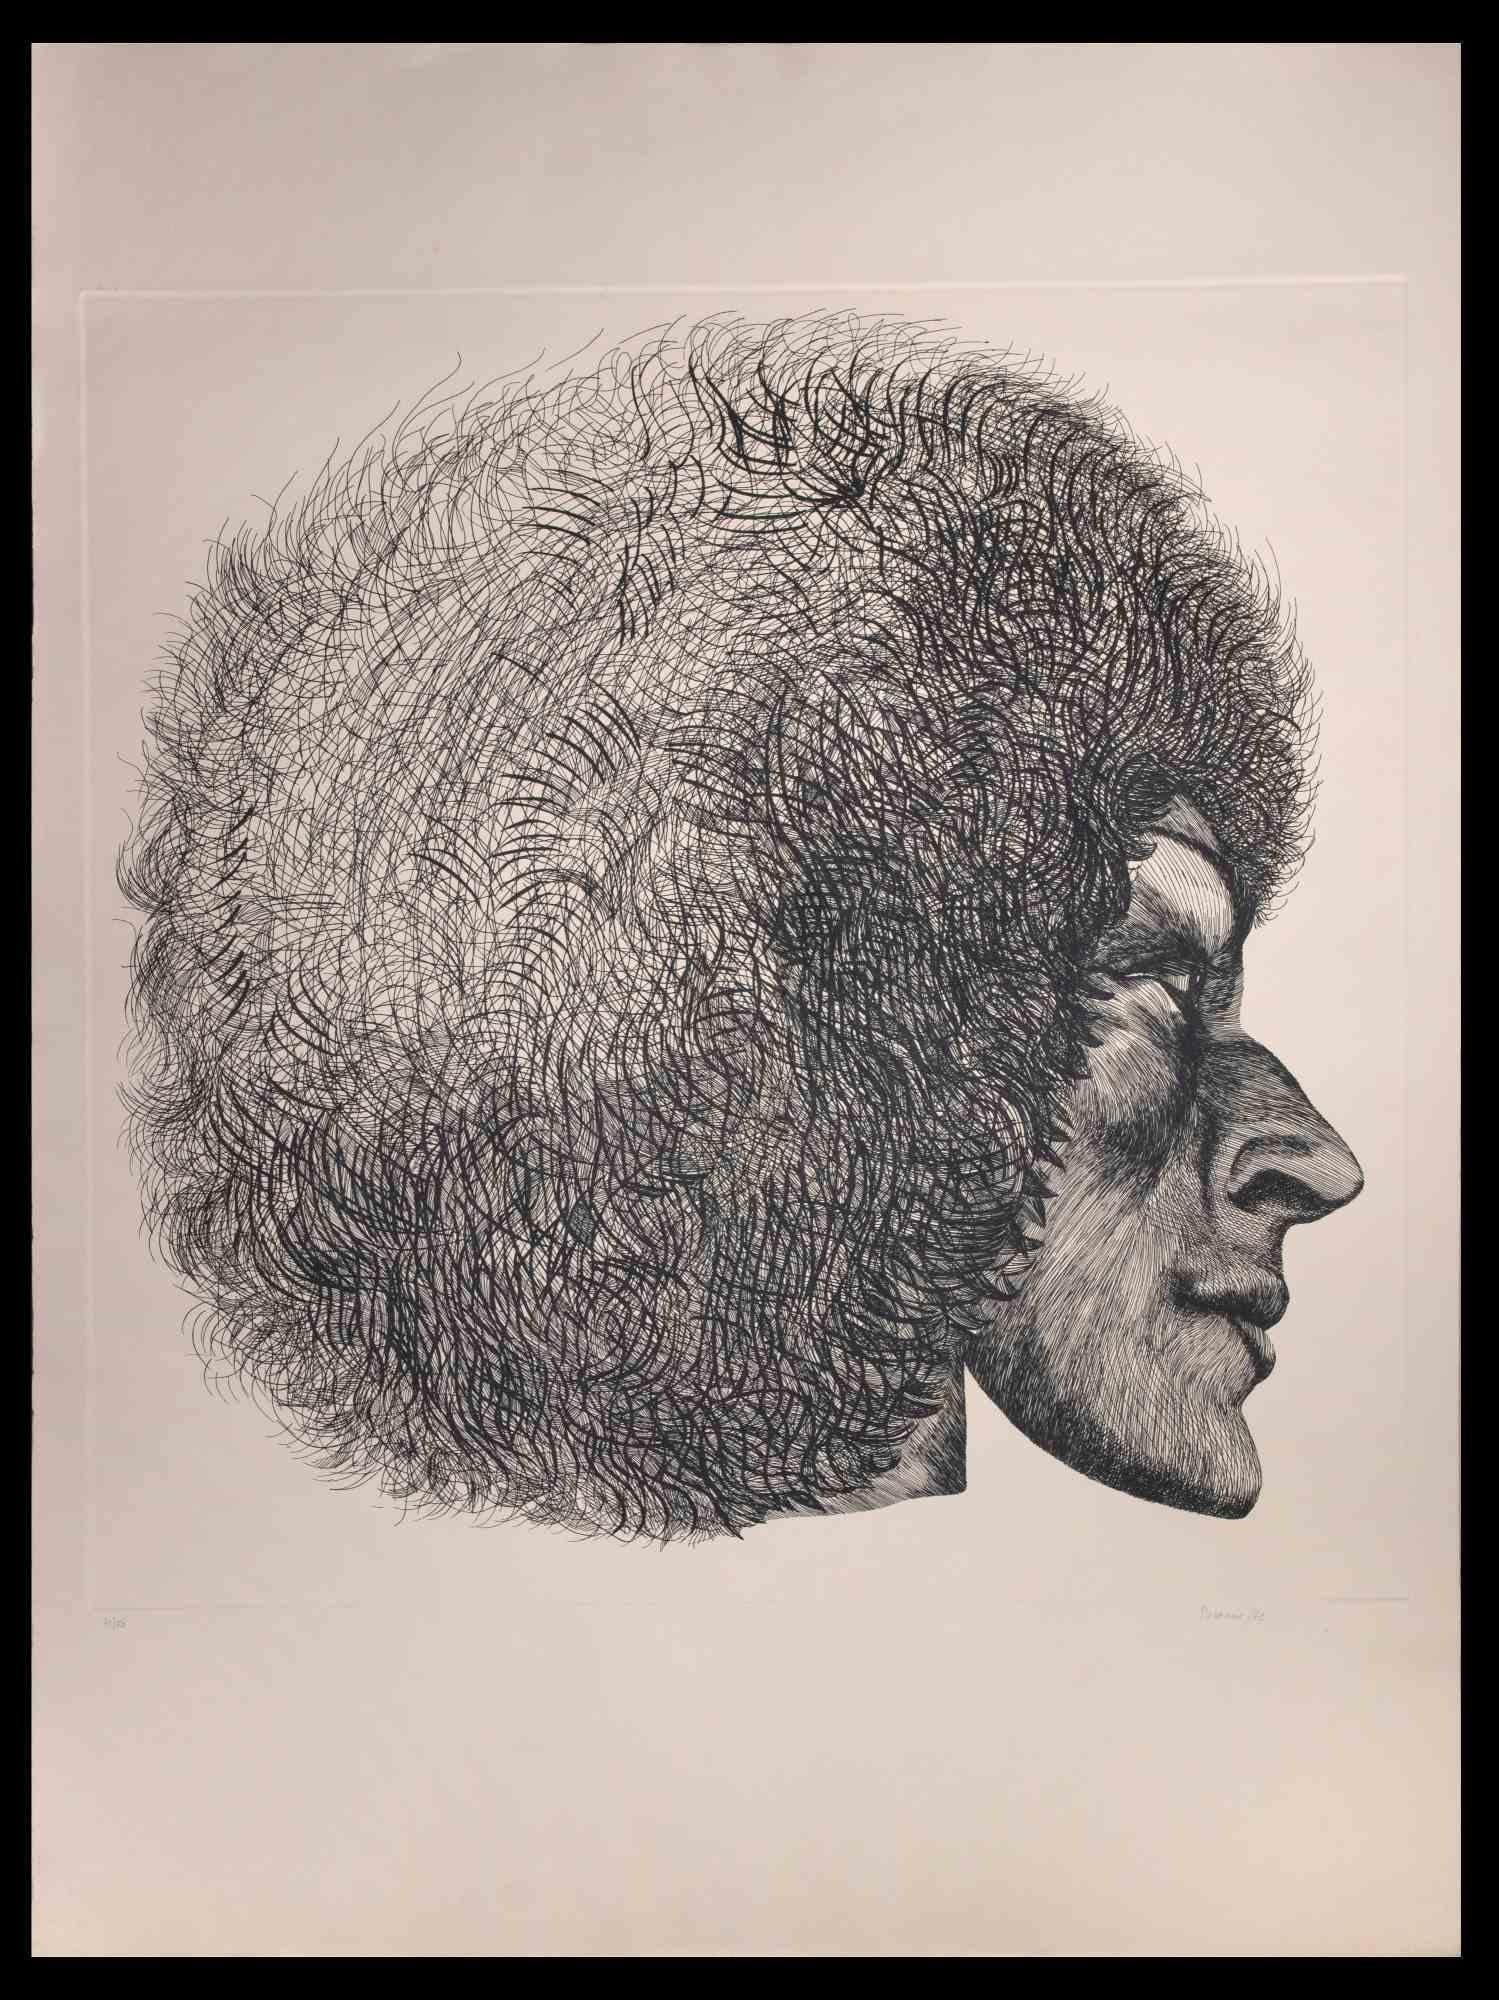 Profile is an original modern artwork realized by the Italian artist Giacomo Porzano (1925-2006) in 1972.

Black and white etching.

Hand-signed and dated on the lower right.

Numbered on the lower left. Edition of 31/50.